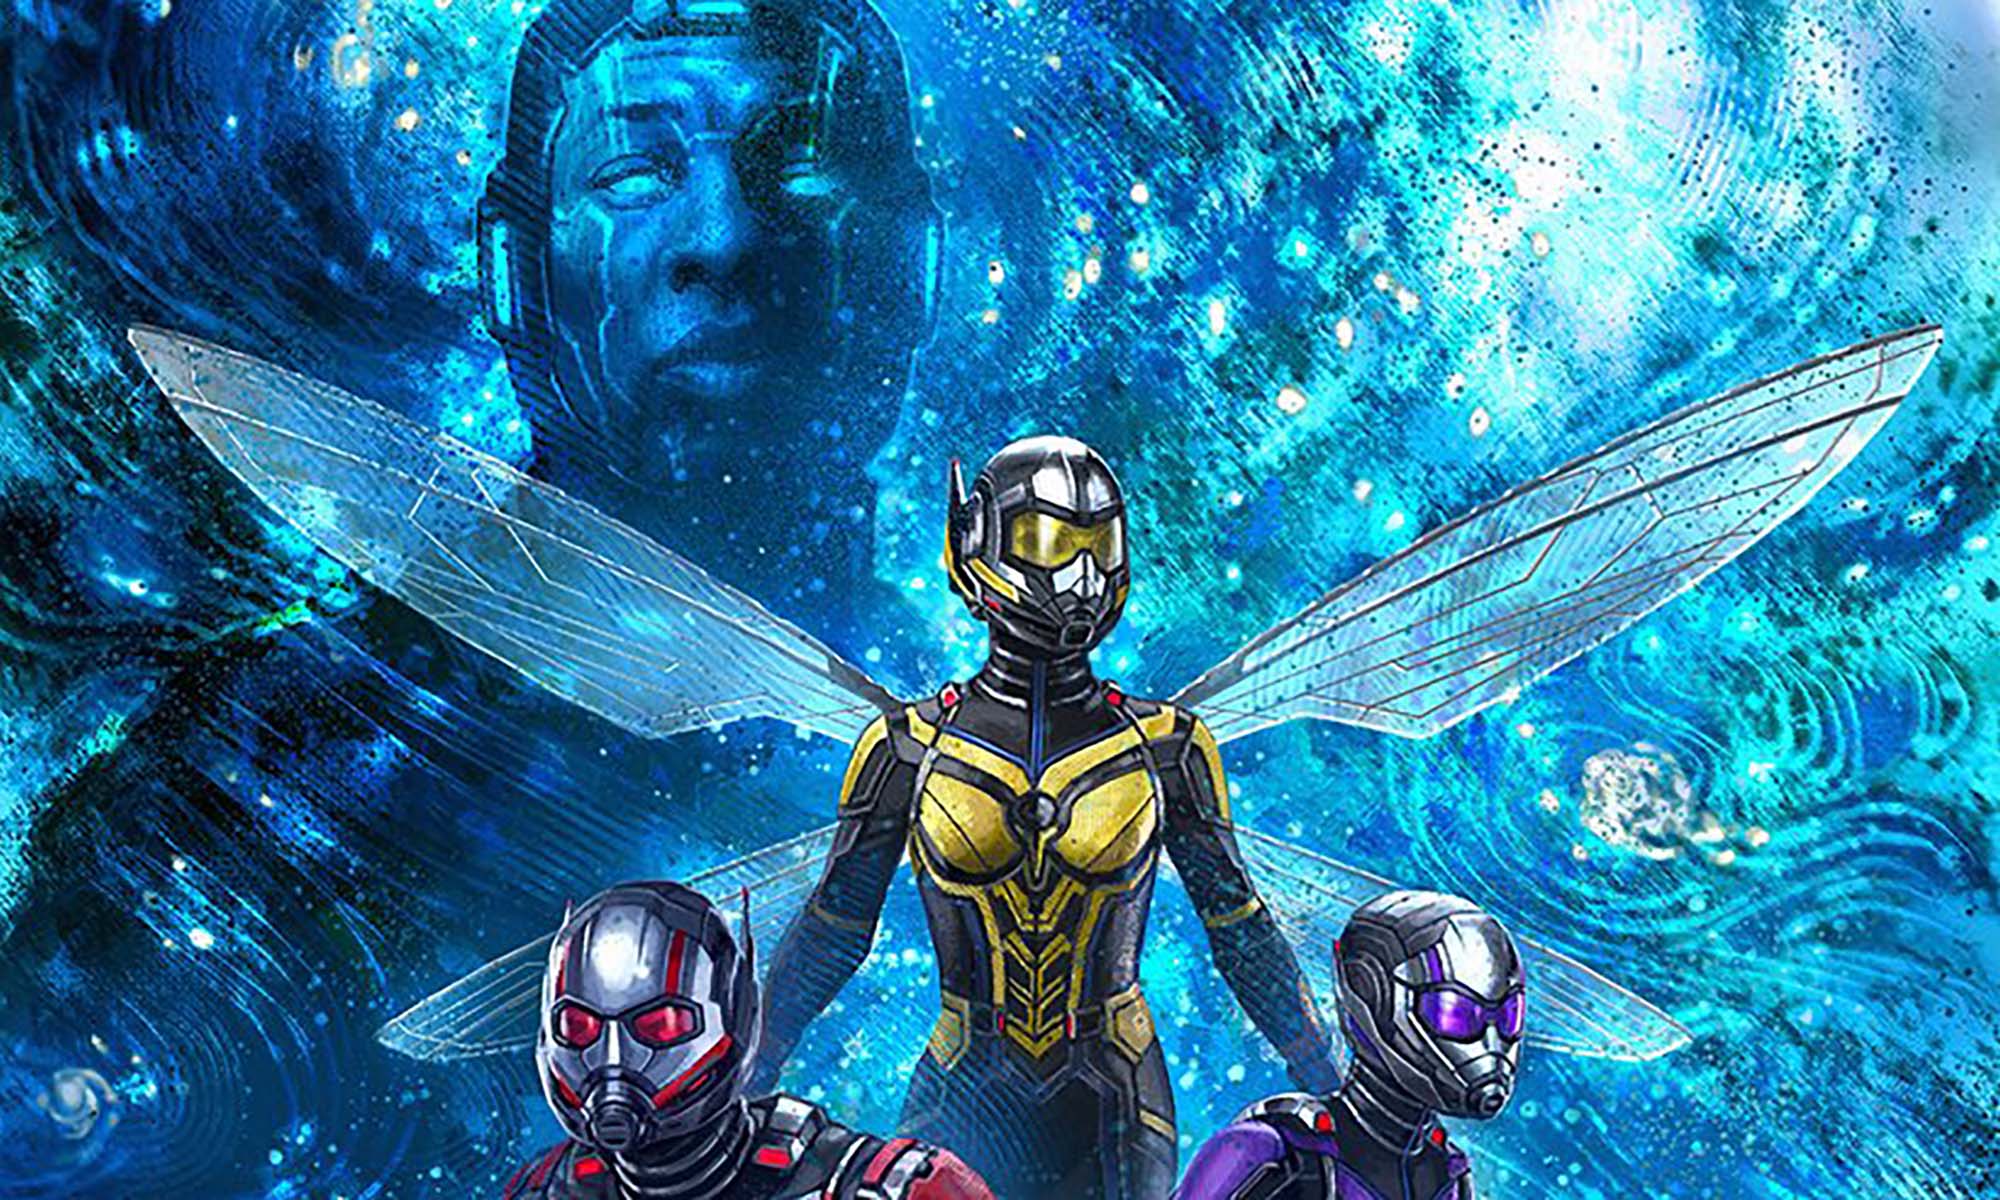 Antman and the Wasp Quantumania will introduce MODOK to MCU